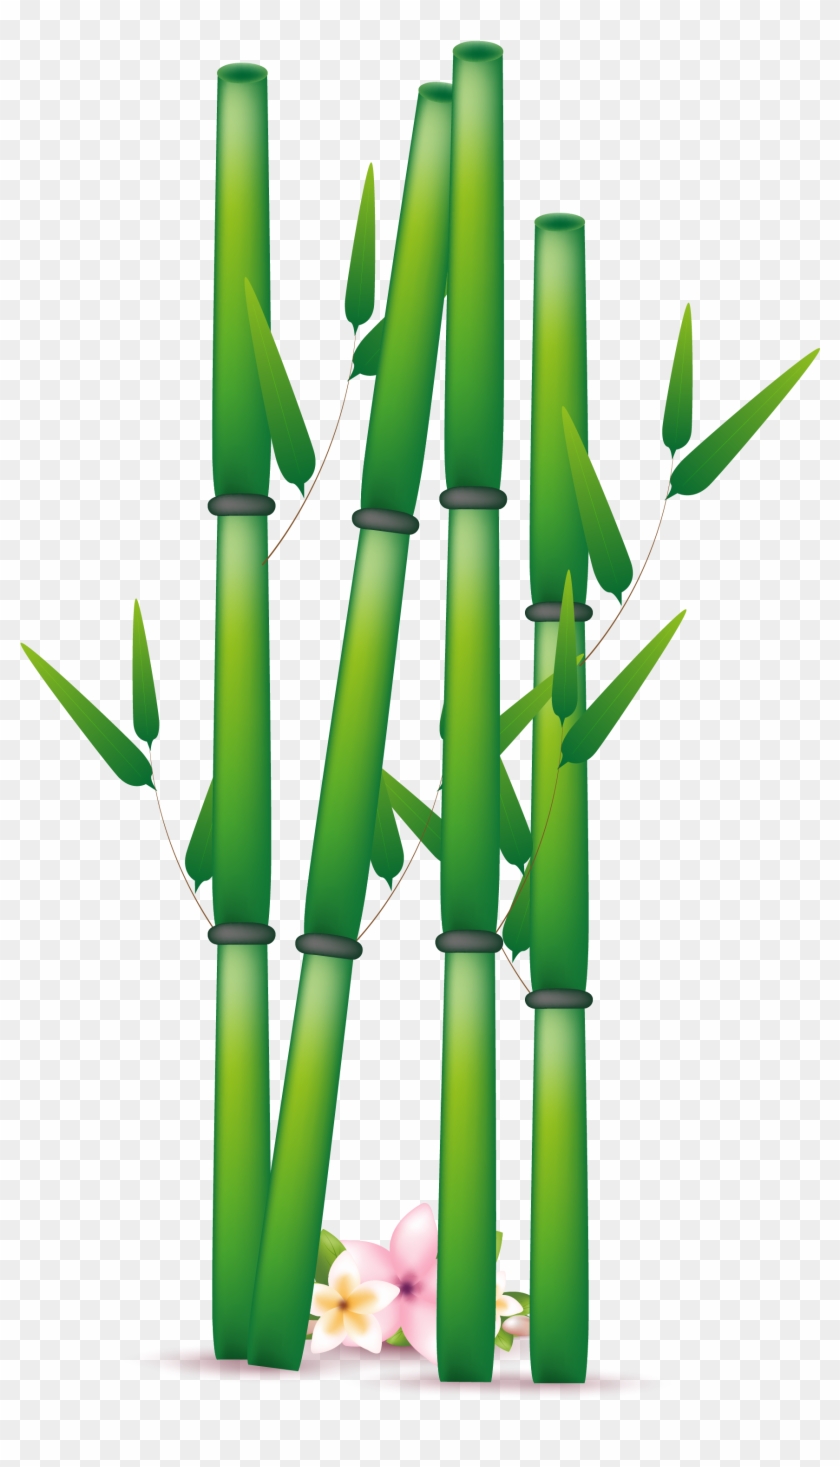 Bamboo Png Clipart Image 01 - Bamboo Clipart #384895